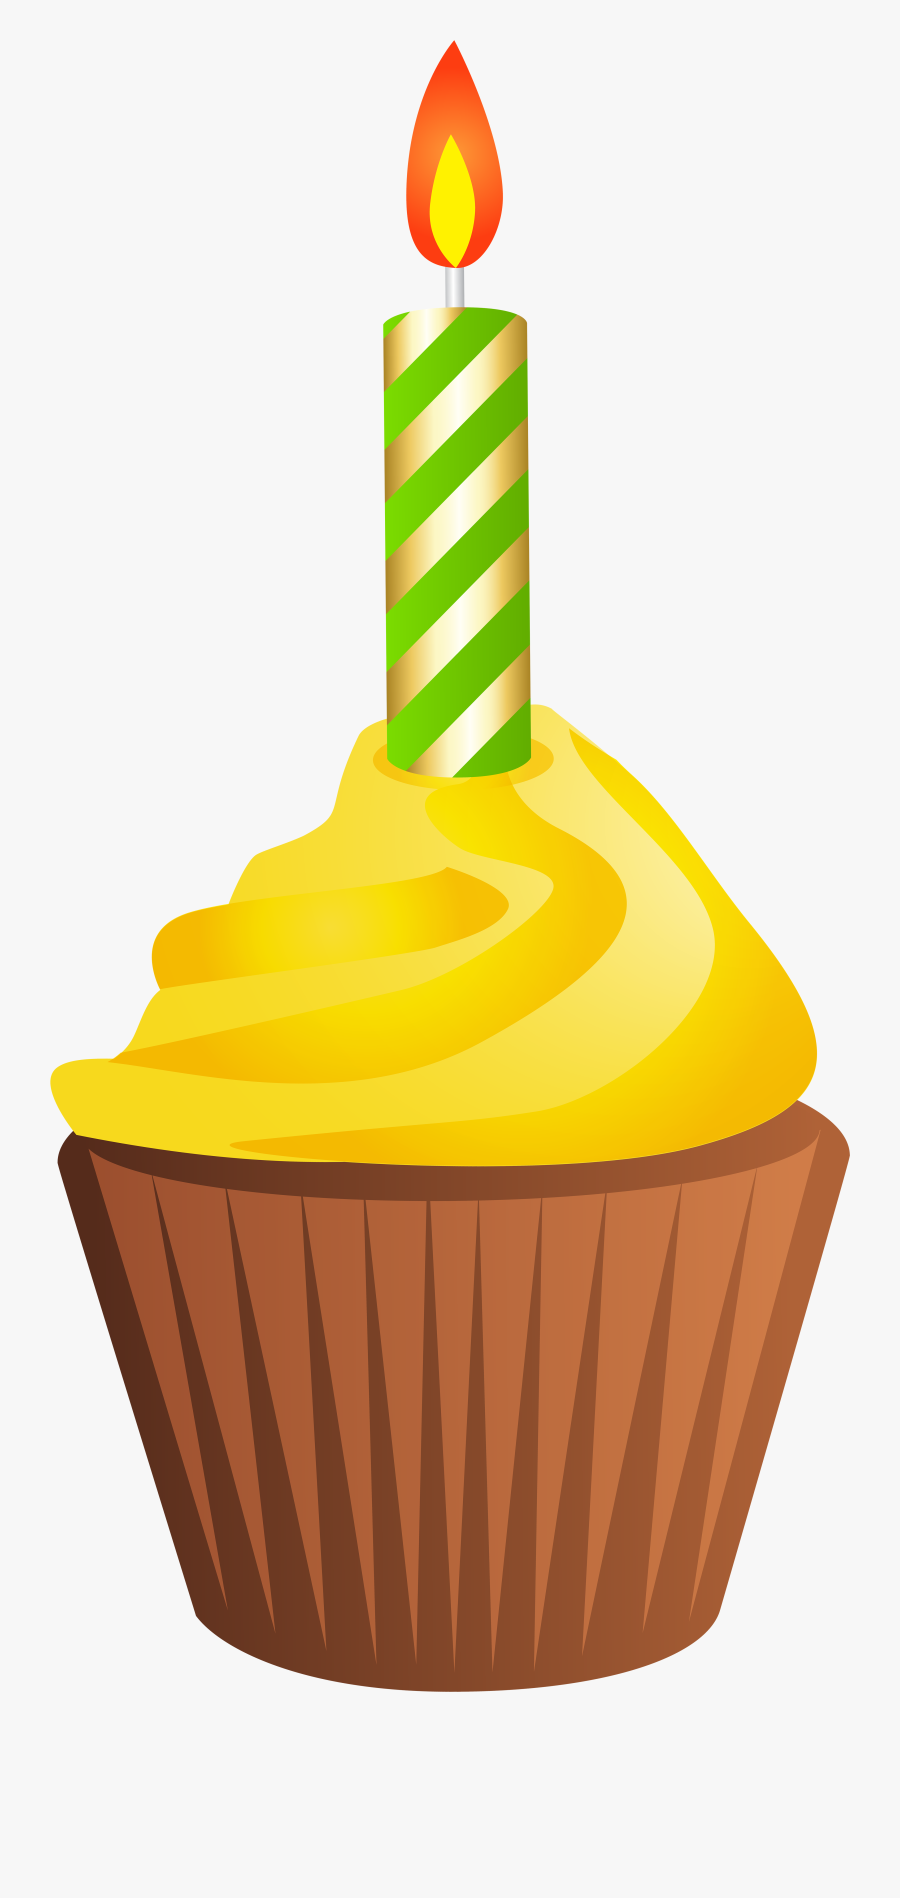 Cupcake Muffin Clipart Colourful Birthday With Candle - Happy Birthday Candle Png, Transparent Clipart